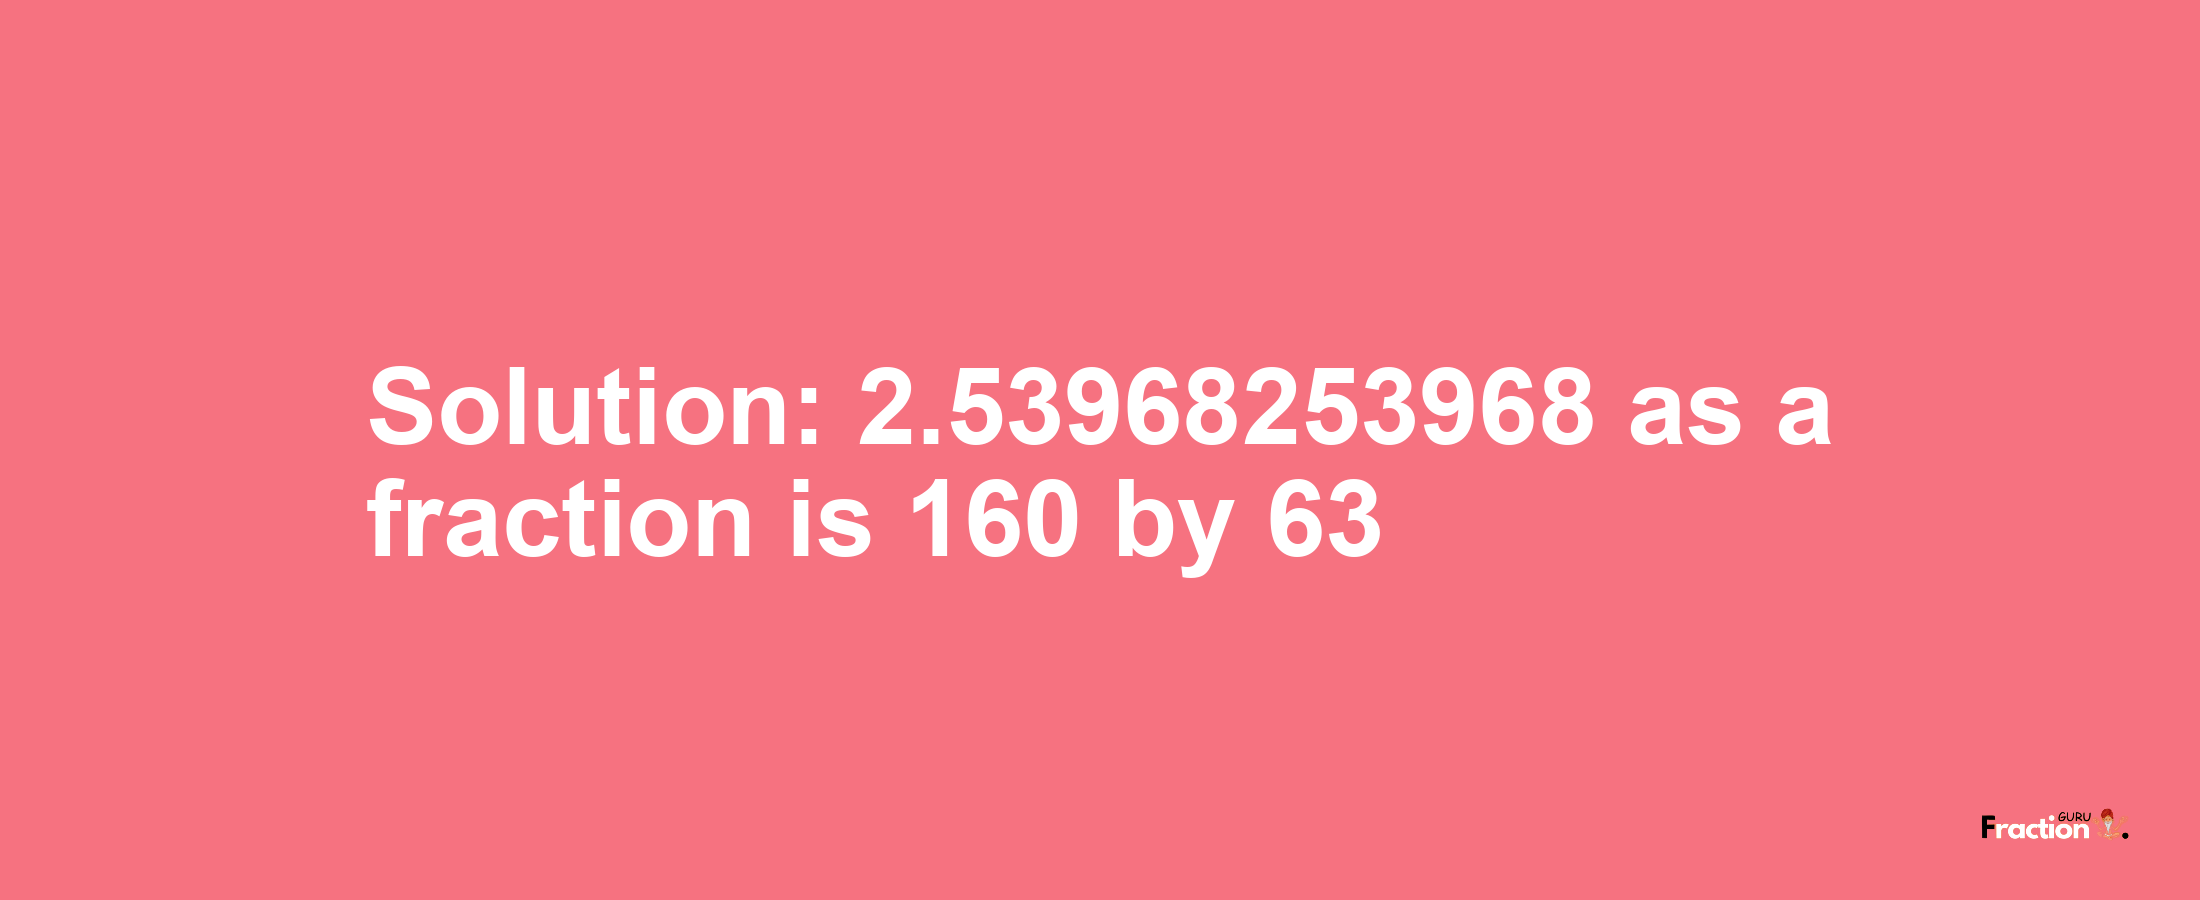 Solution:2.53968253968 as a fraction is 160/63